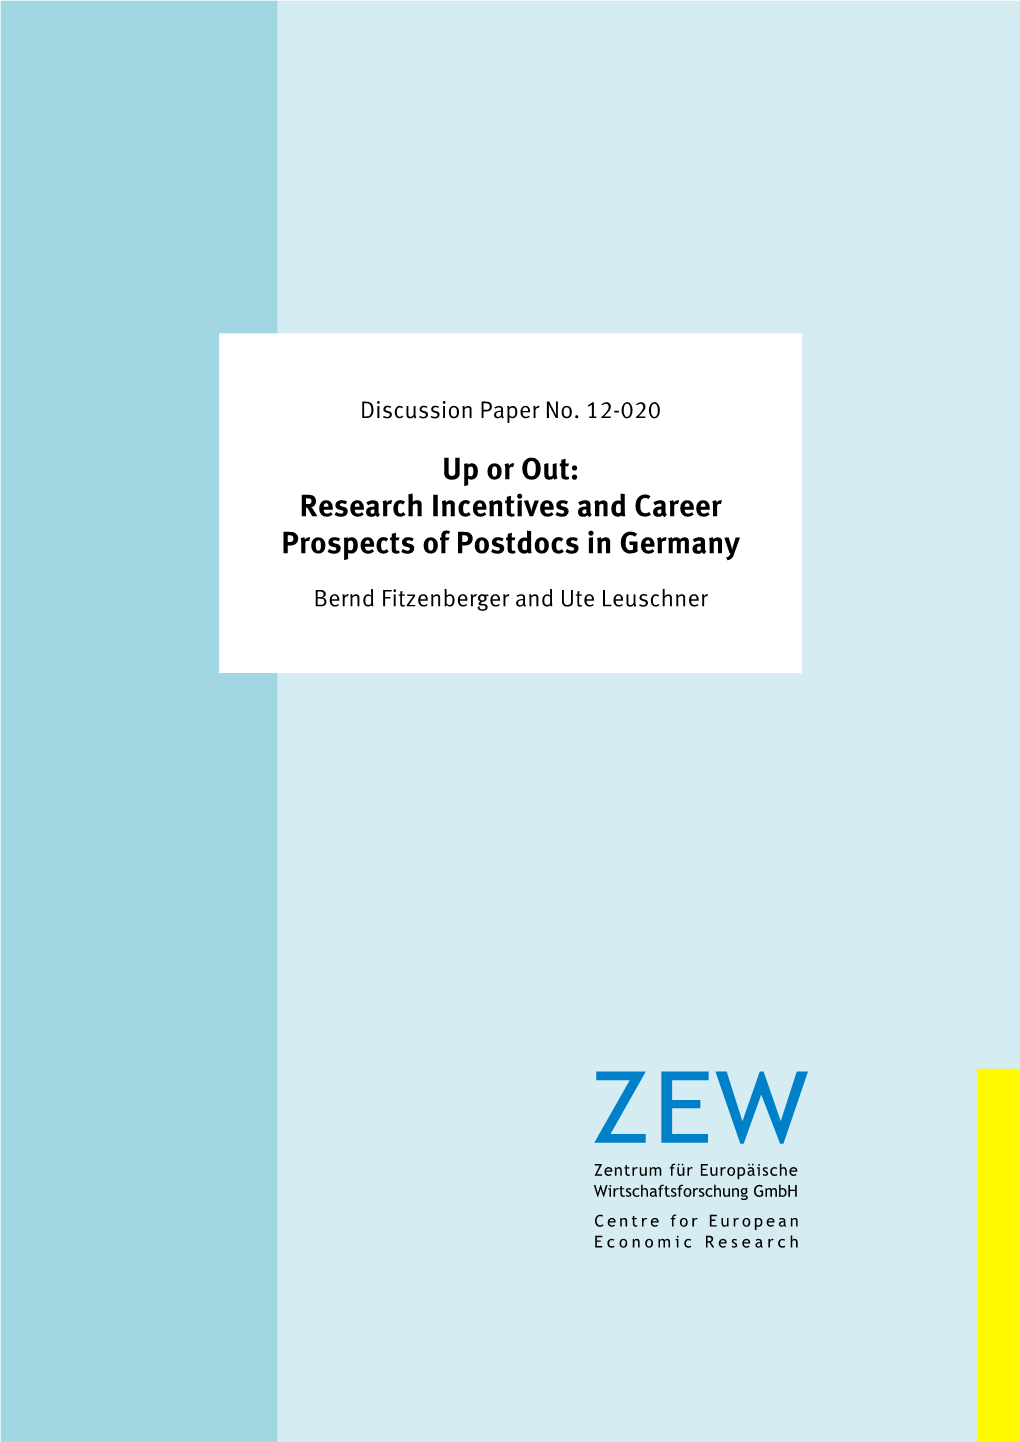 Up Or Out: Research Incentives and Career Prospects of Postdocs in Germany